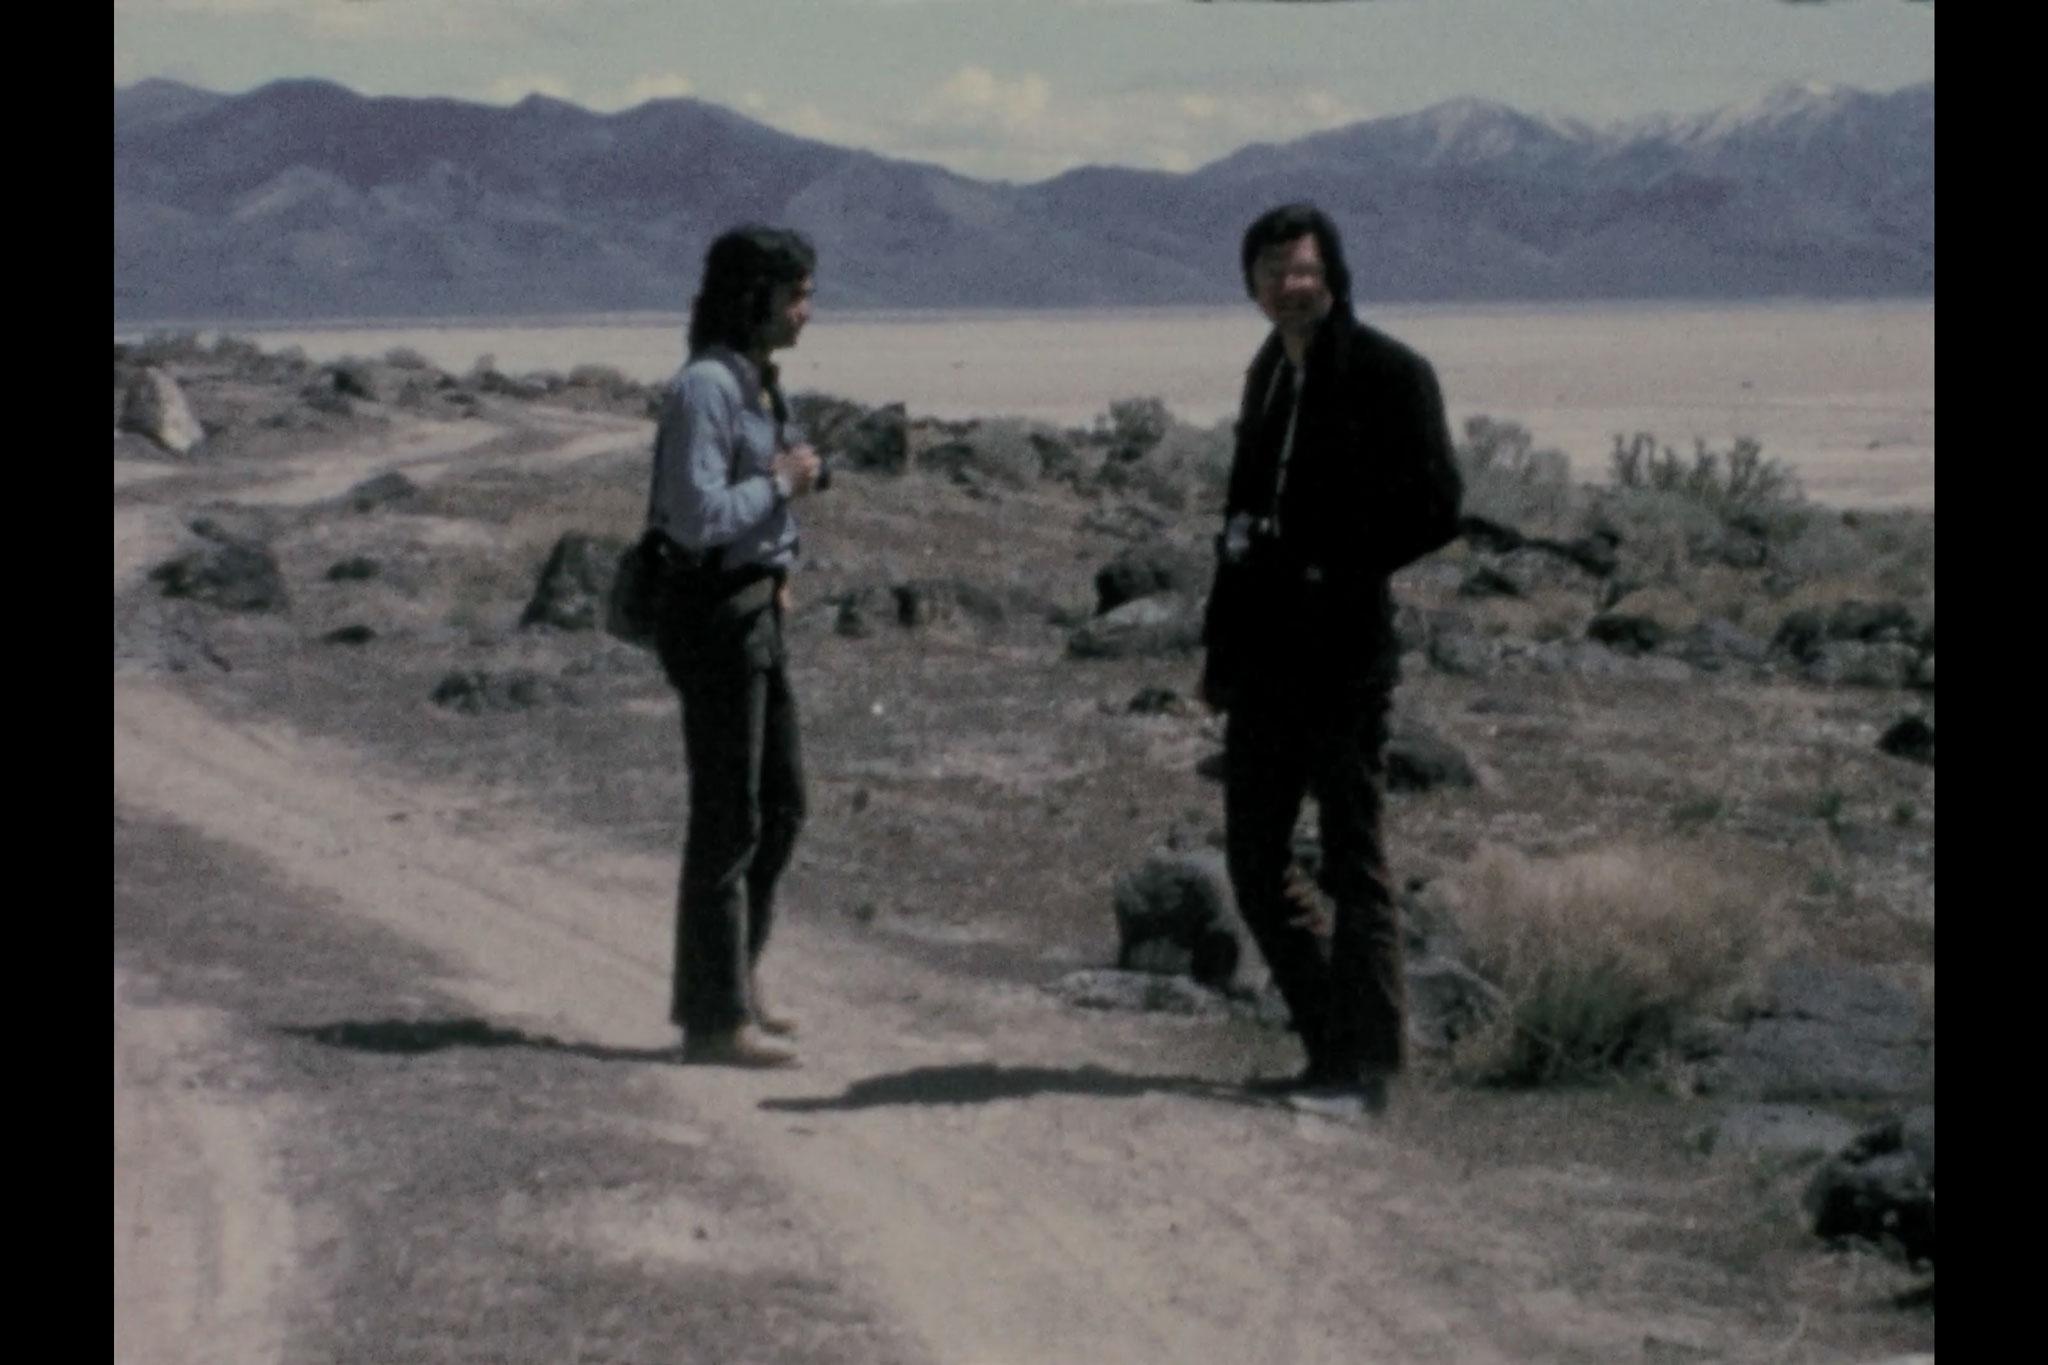 Two figures standing on a dirt road with mountains in the background